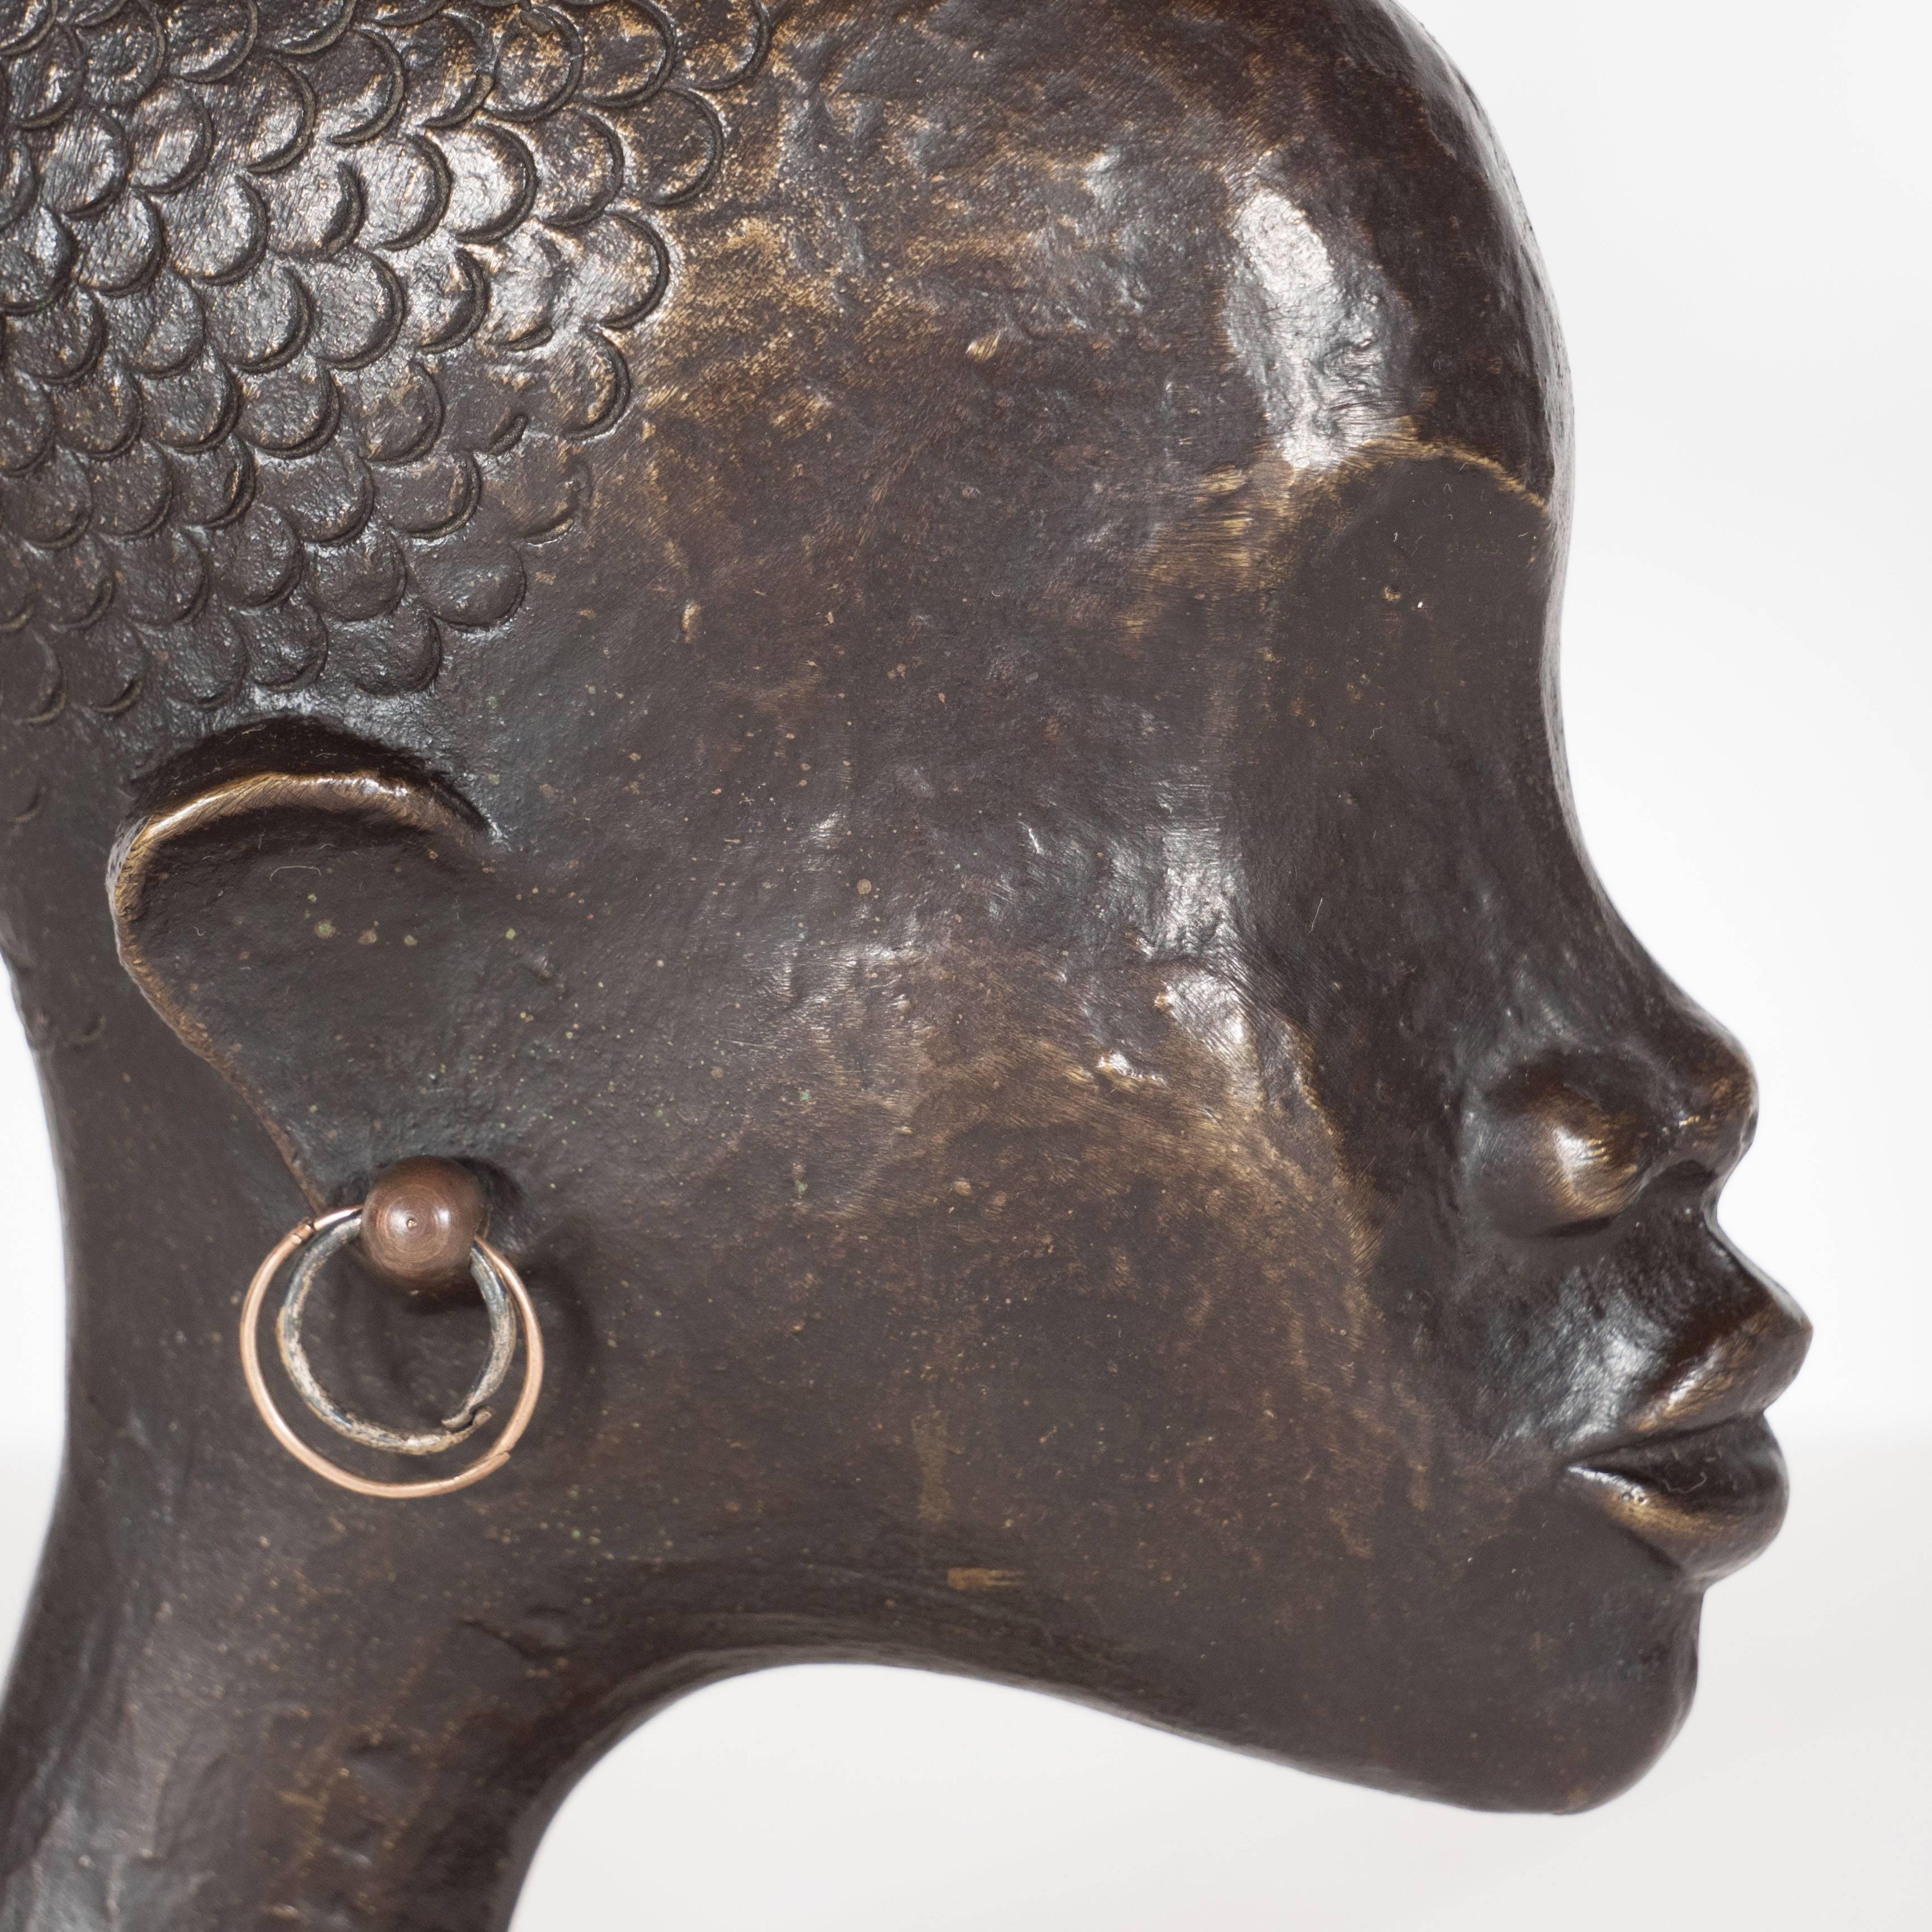 A Mid-Century Modernist patinated bronze of an African woman's head in profile by Werkstatte Hagenauer. She is adorned with brass hoop earrings. In place of hair are fish scales in the form of a splayed tail. A playful yet elegant example of